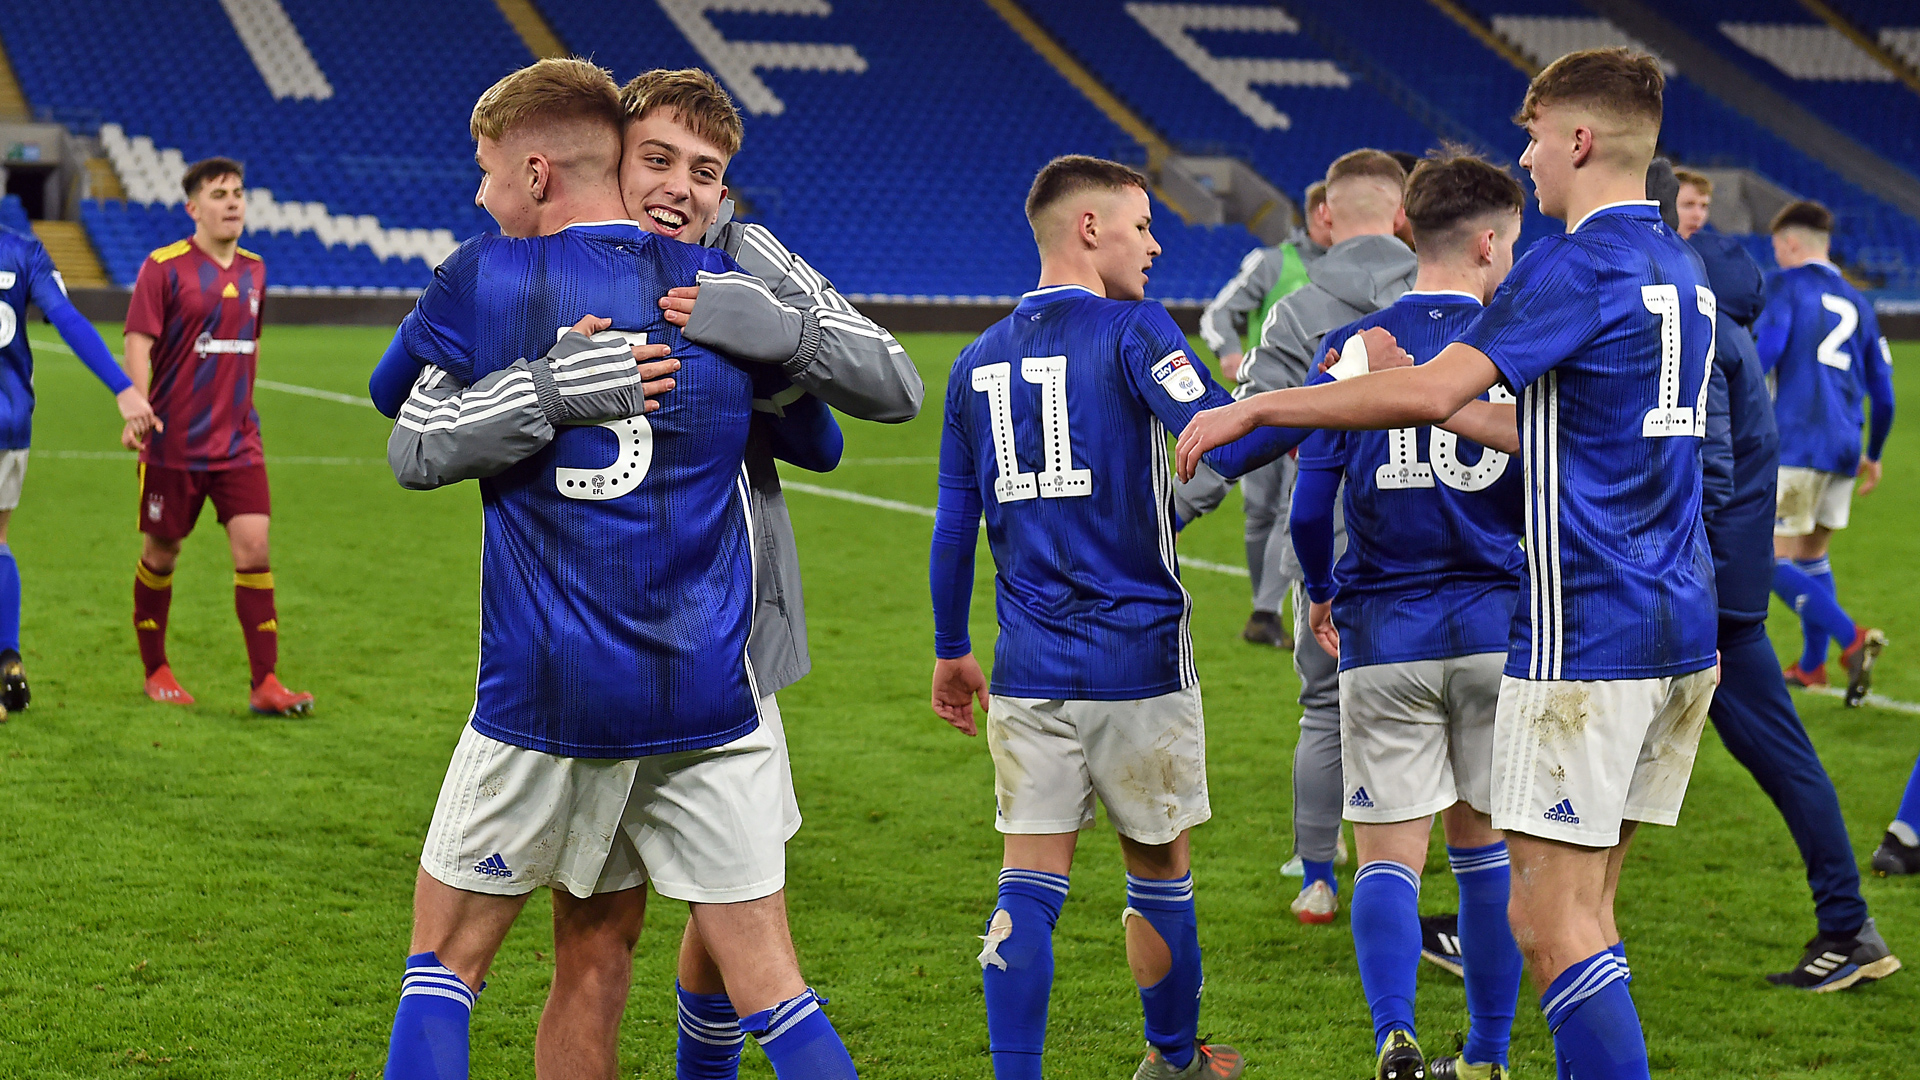 The Bluebirds celebrate after the match...